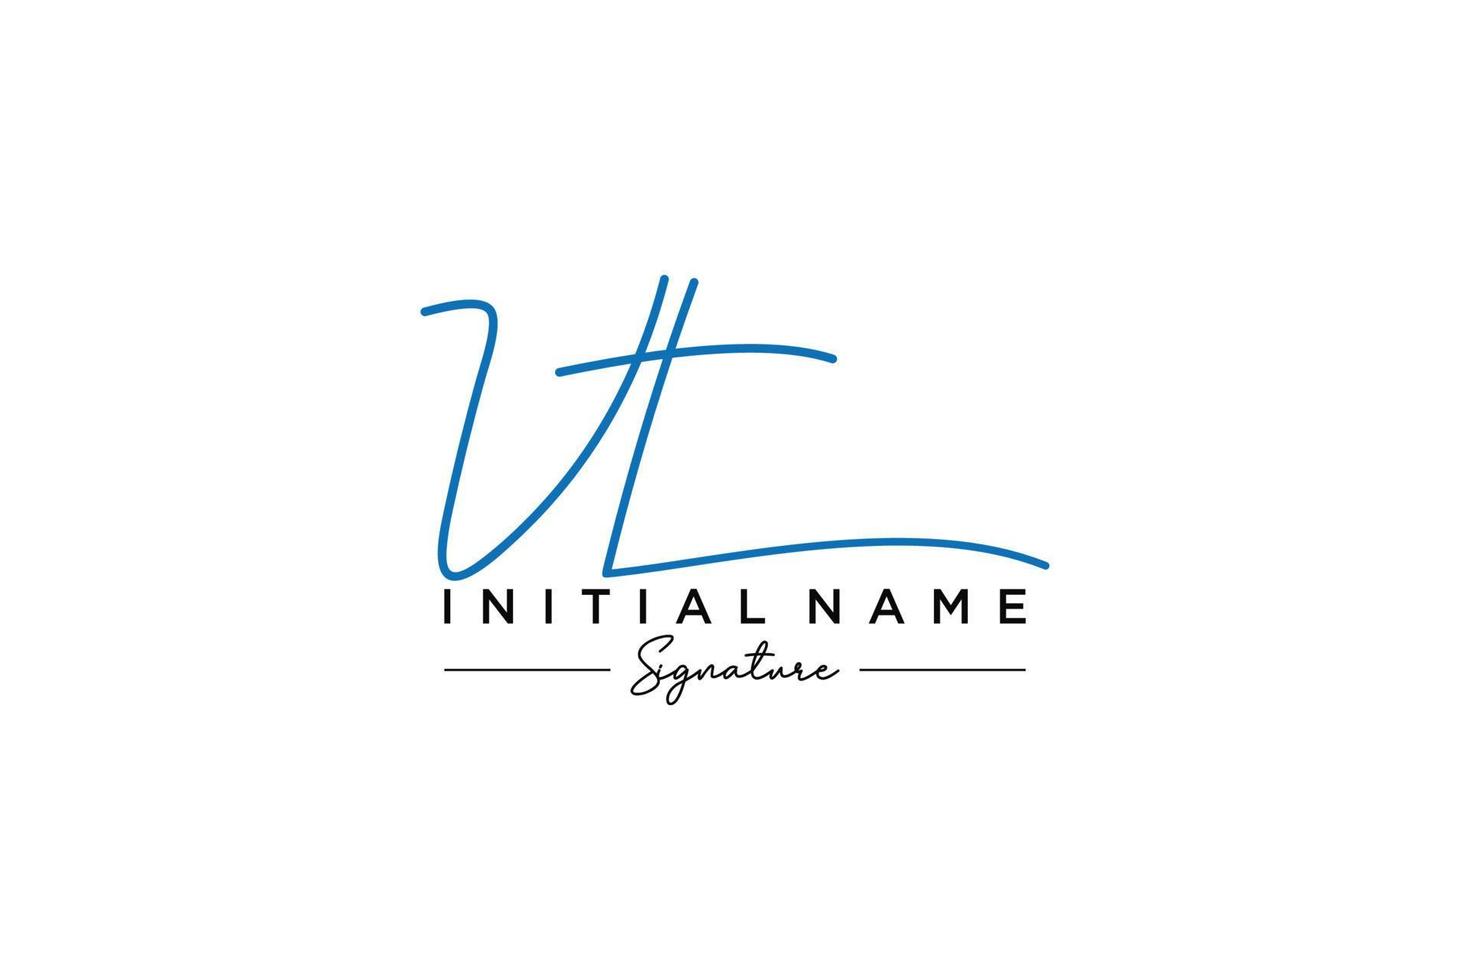 Initial VT signature logo template vector. Hand drawn Calligraphy lettering Vector illustration.